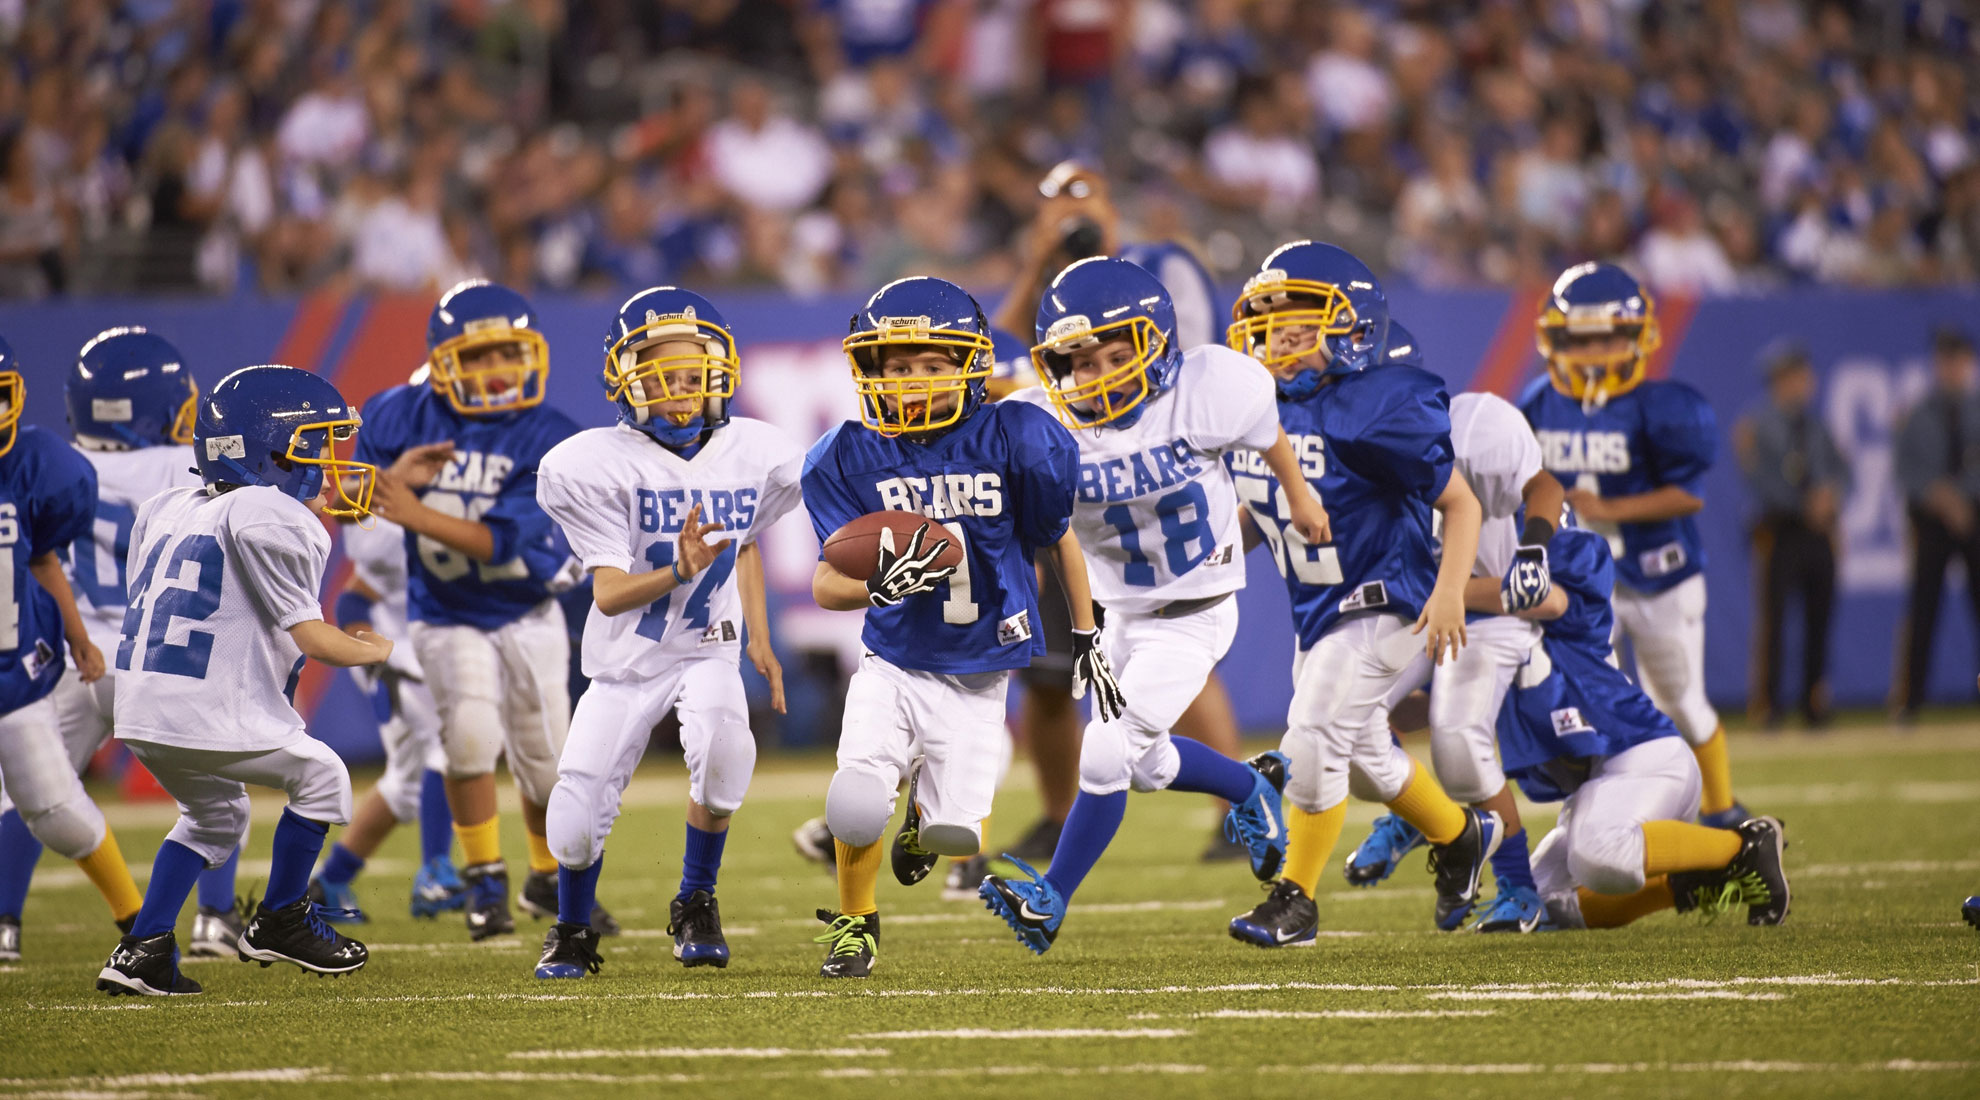 A parent's dilemma: Should you let your kid play football? | Sports ...